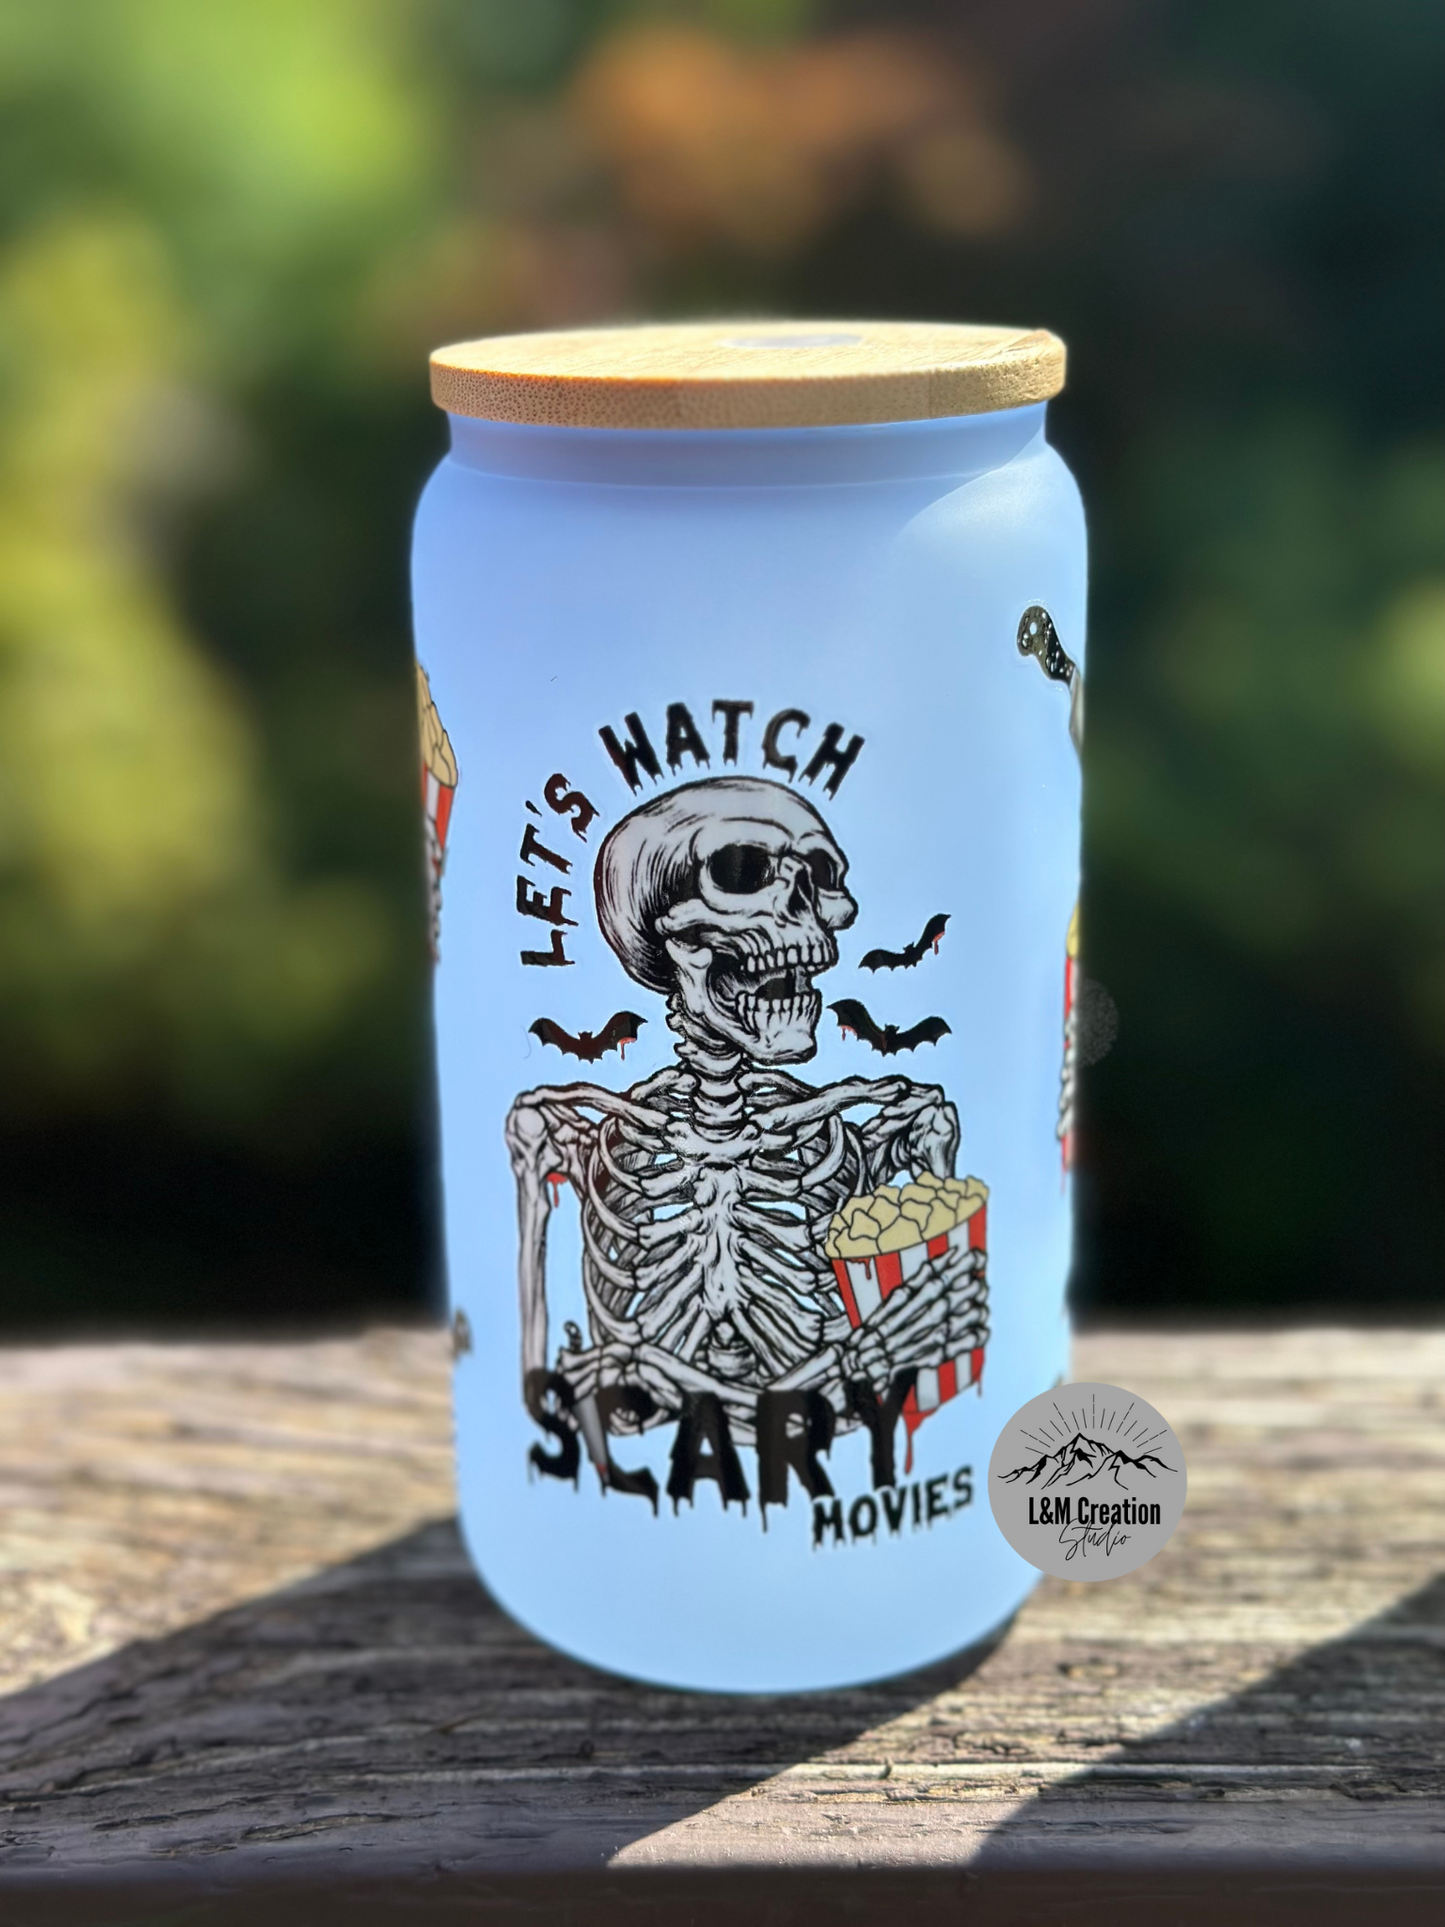 16oz Color Change_Let's watch Scary movies